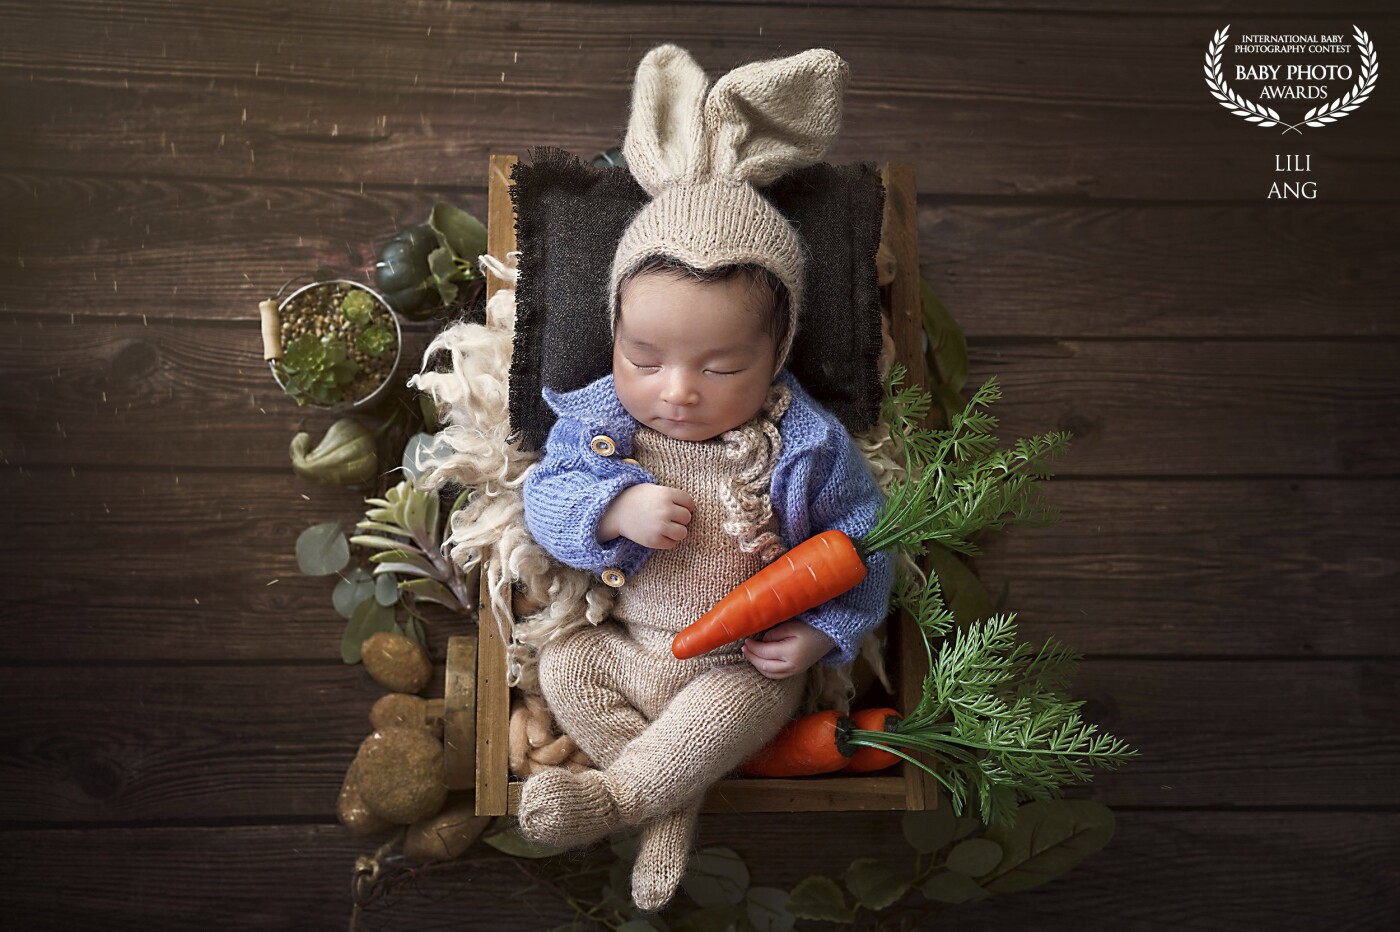 Peter Rabbit theme ????<br />
The concept is classic. Rabbit love carrot , so this picture is just simple as that.<br />
<br />
This concept is specially made for Baby Aizen, handsome son of Erick Bana Iskandar & Vanessa Iskandar.<br />
<br />
So, this award dedicated to your lovely family. Erick, Vanessa and Baby Aizen.<br />
<br />
With❤️, <br />
Lili Ang